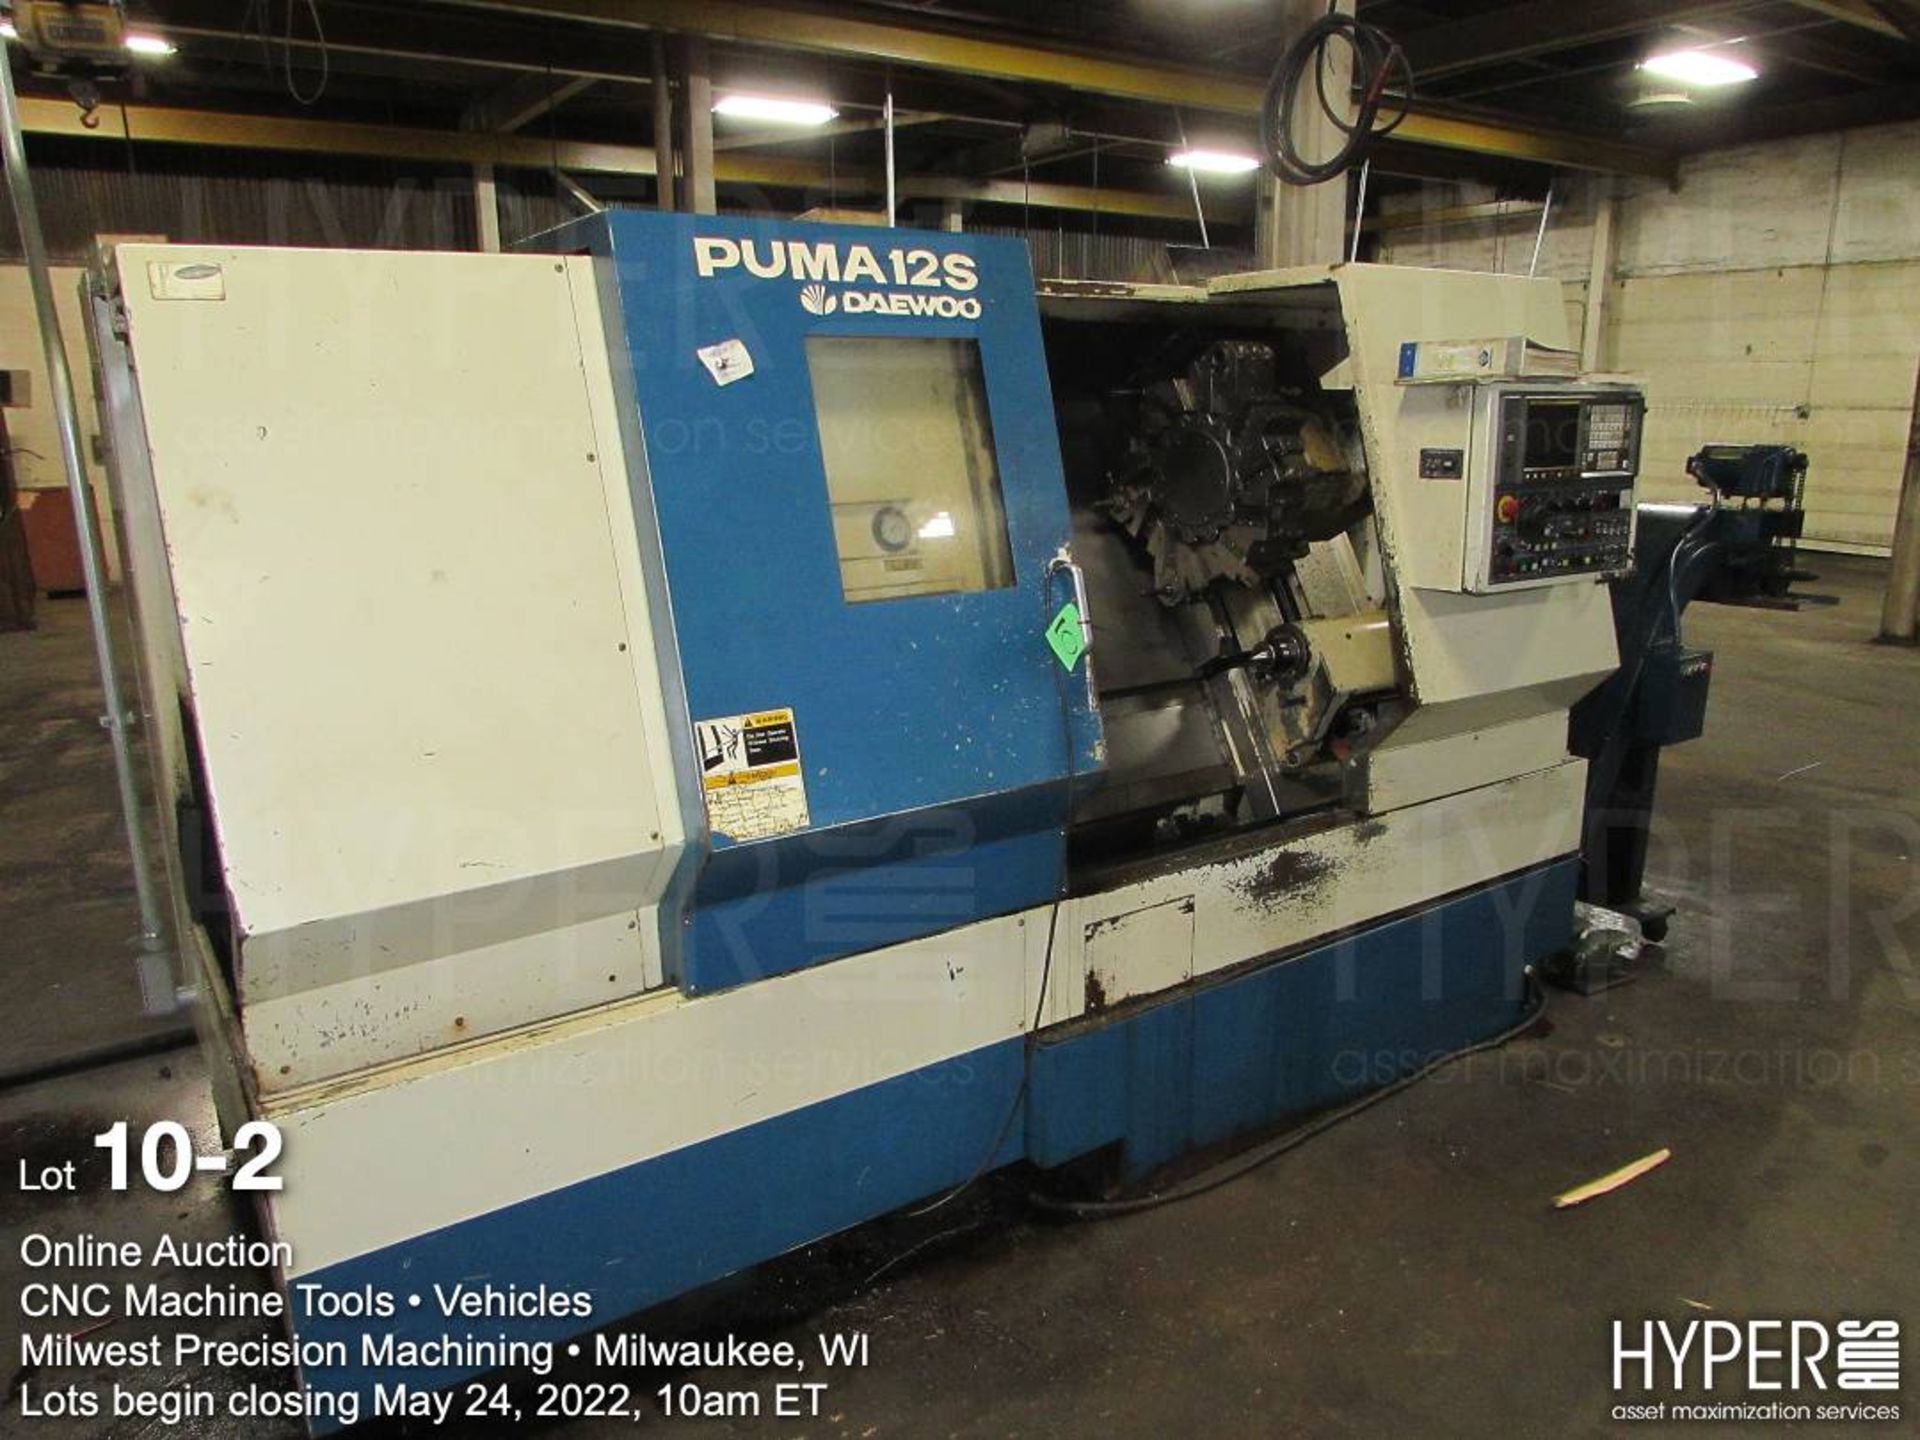 Daewoo Puma 12-S CNC lathe S/N PS100877, 12 position tool turret, three jaw 12" diameter chuck with - Image 2 of 11